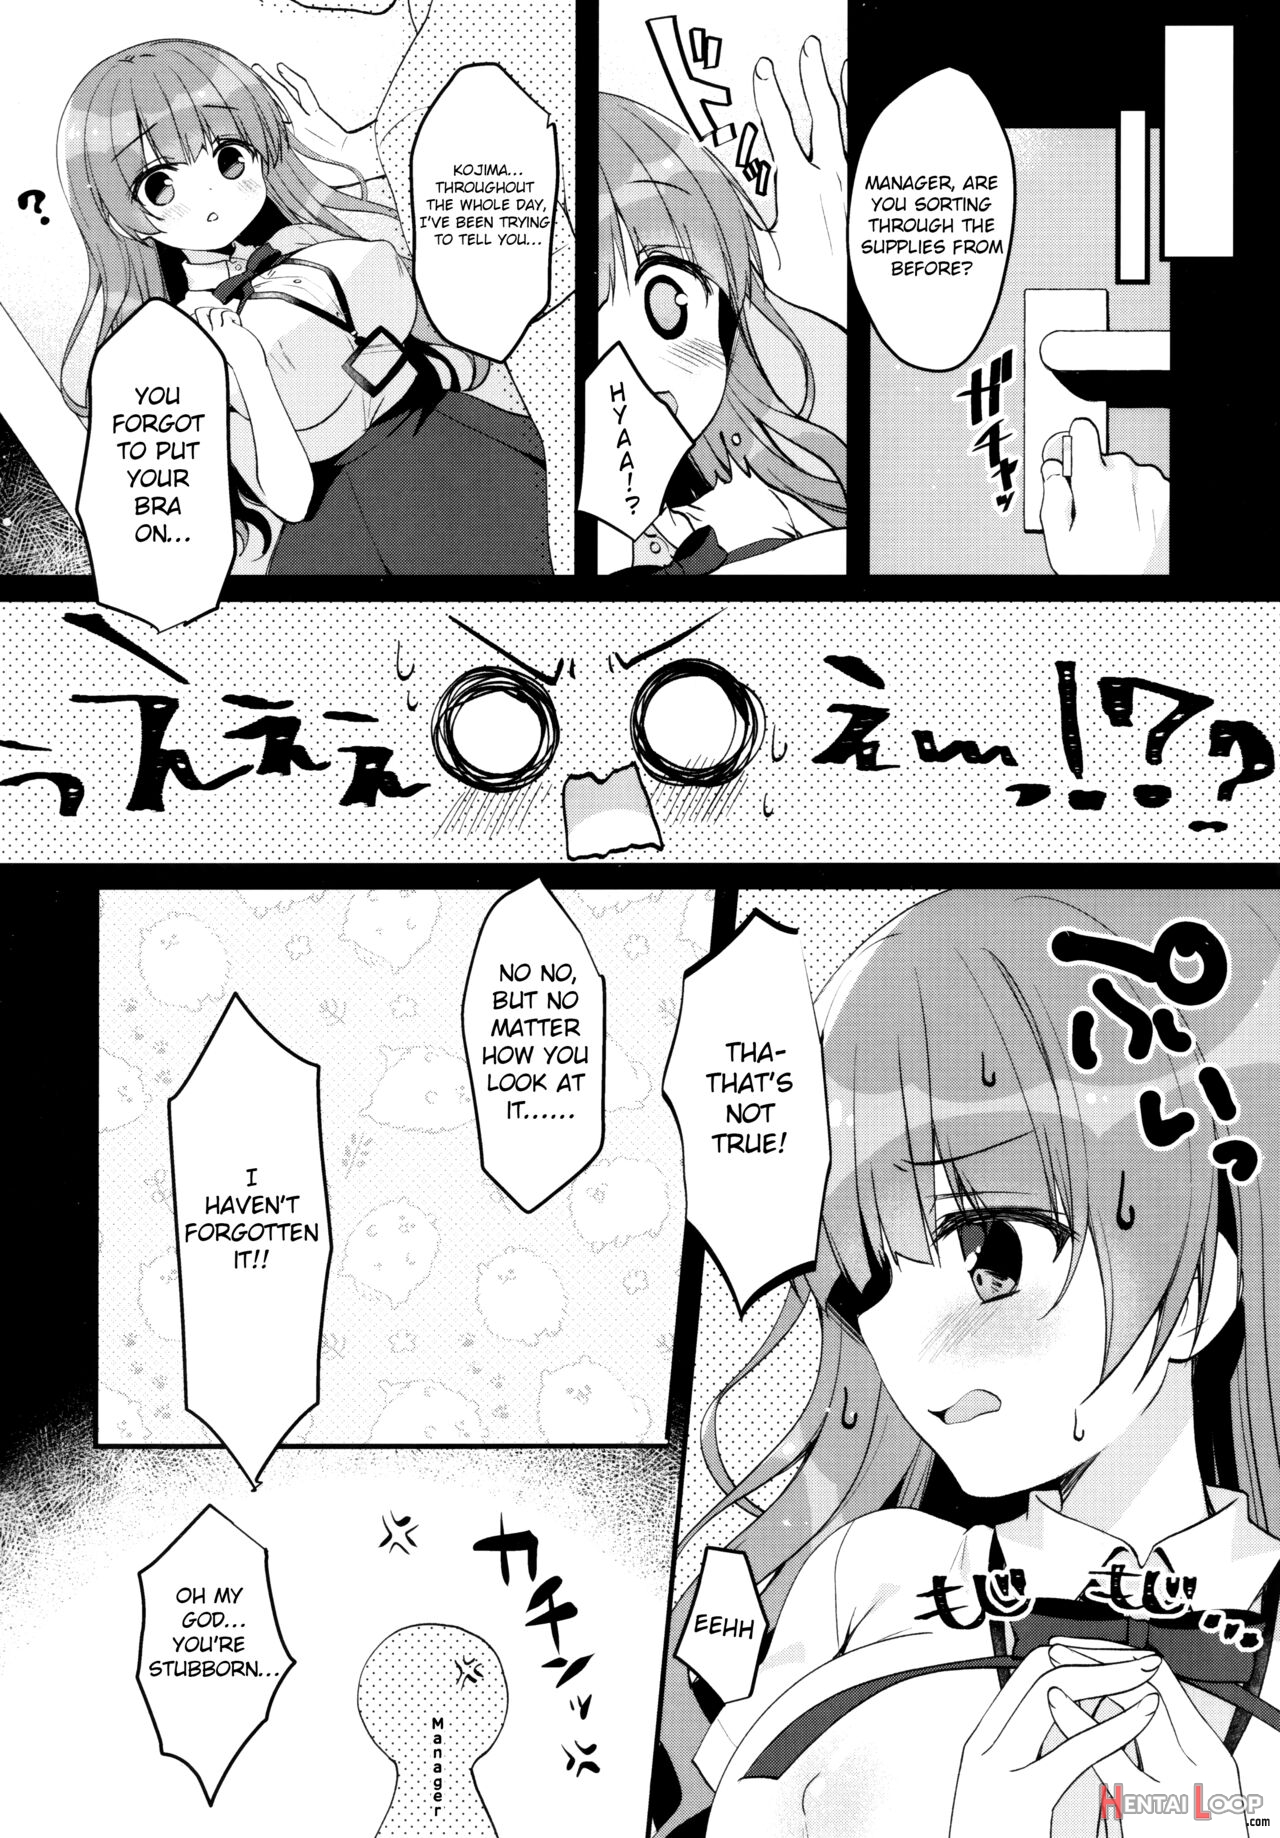 Ojima-chan’s Overtime page 4